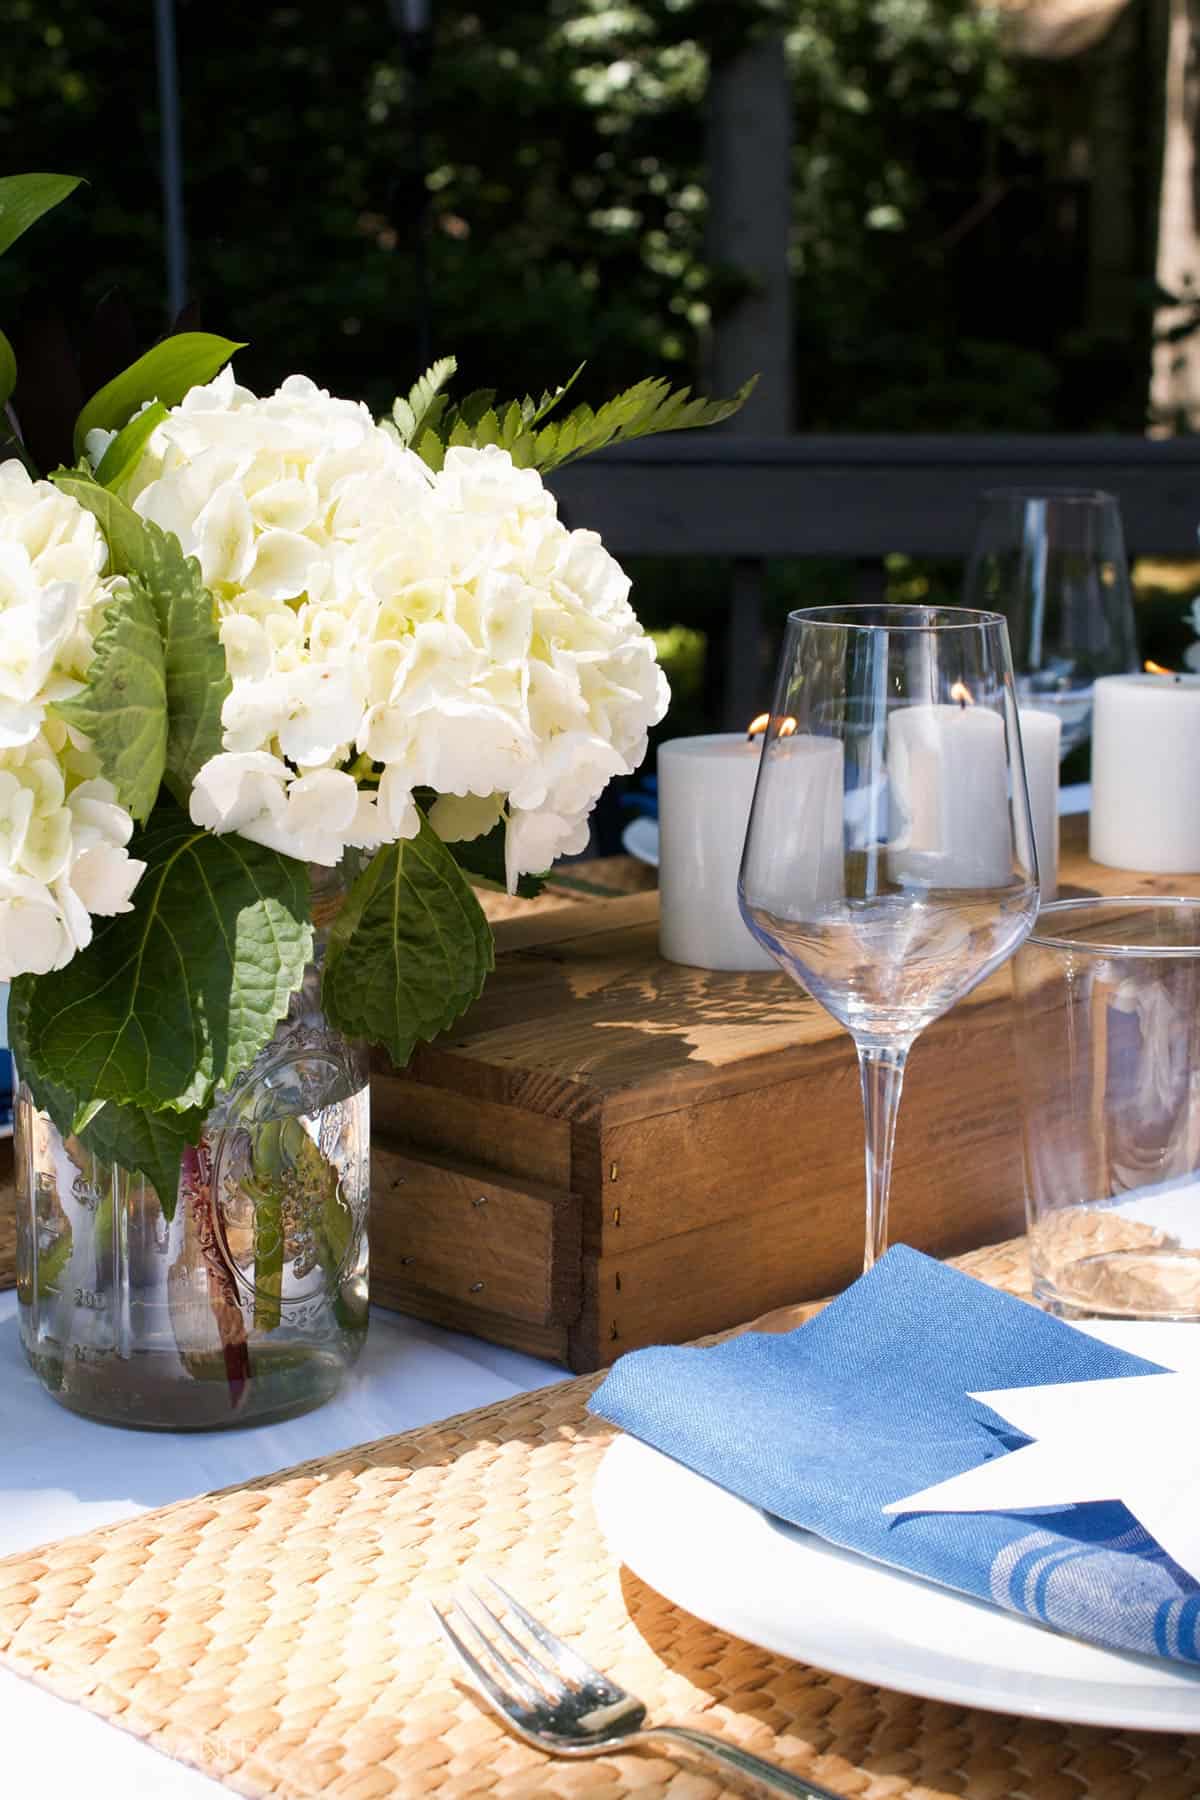 A sunny picnic table with candles and flowers.